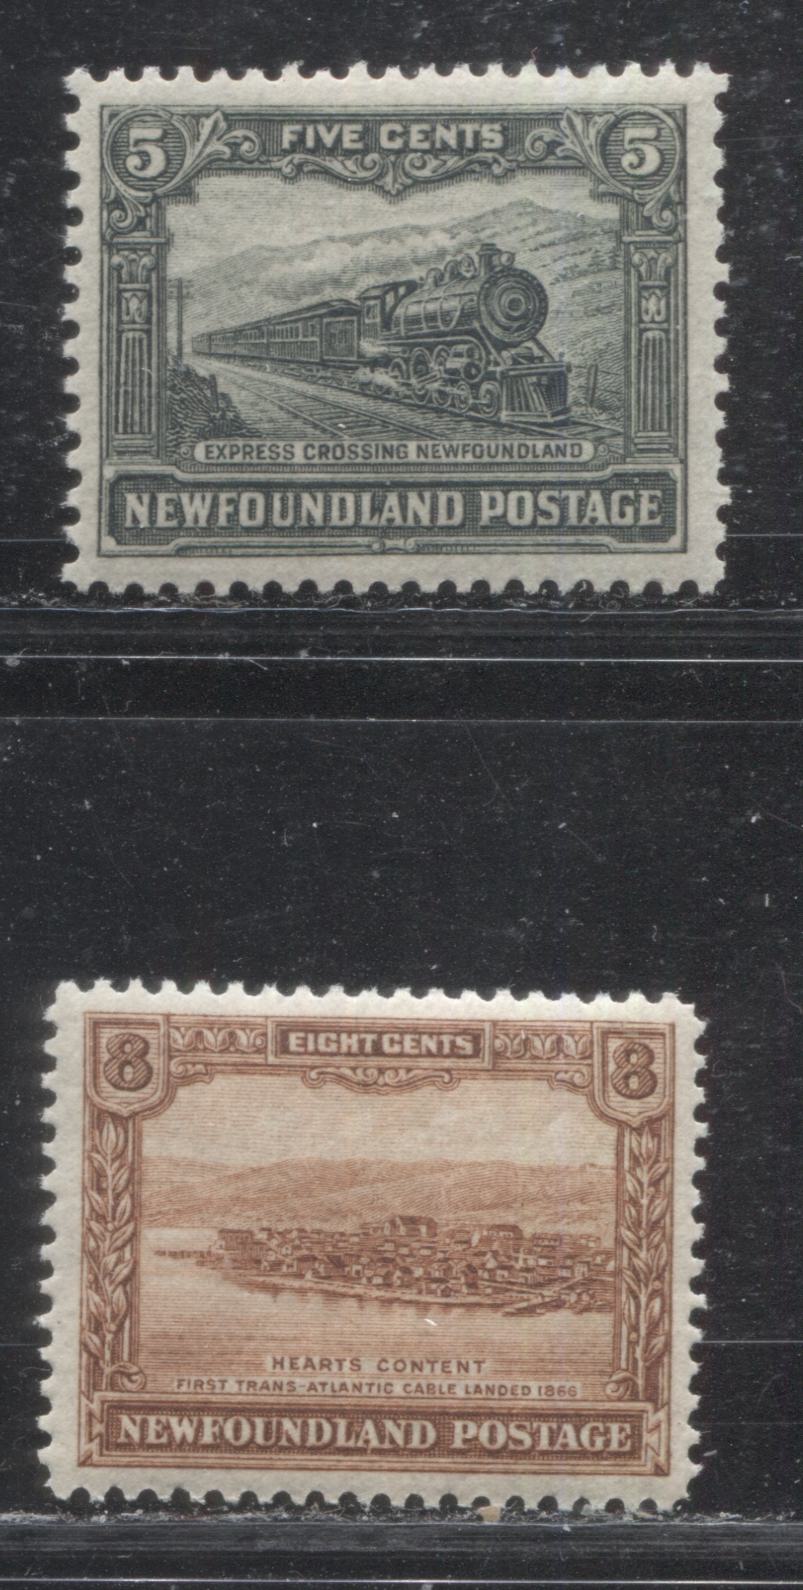 Lot 68 Newfoundland # 149, 151 5c - 8c Slate Green - Deep Orange Brown Express Crossing - Heart's Content, 1928-1929 Publicity Issue, Two VFOG Examples, Comb Perf. 13.6 x 12.7 and Line Perf. 14.2 x 14.1